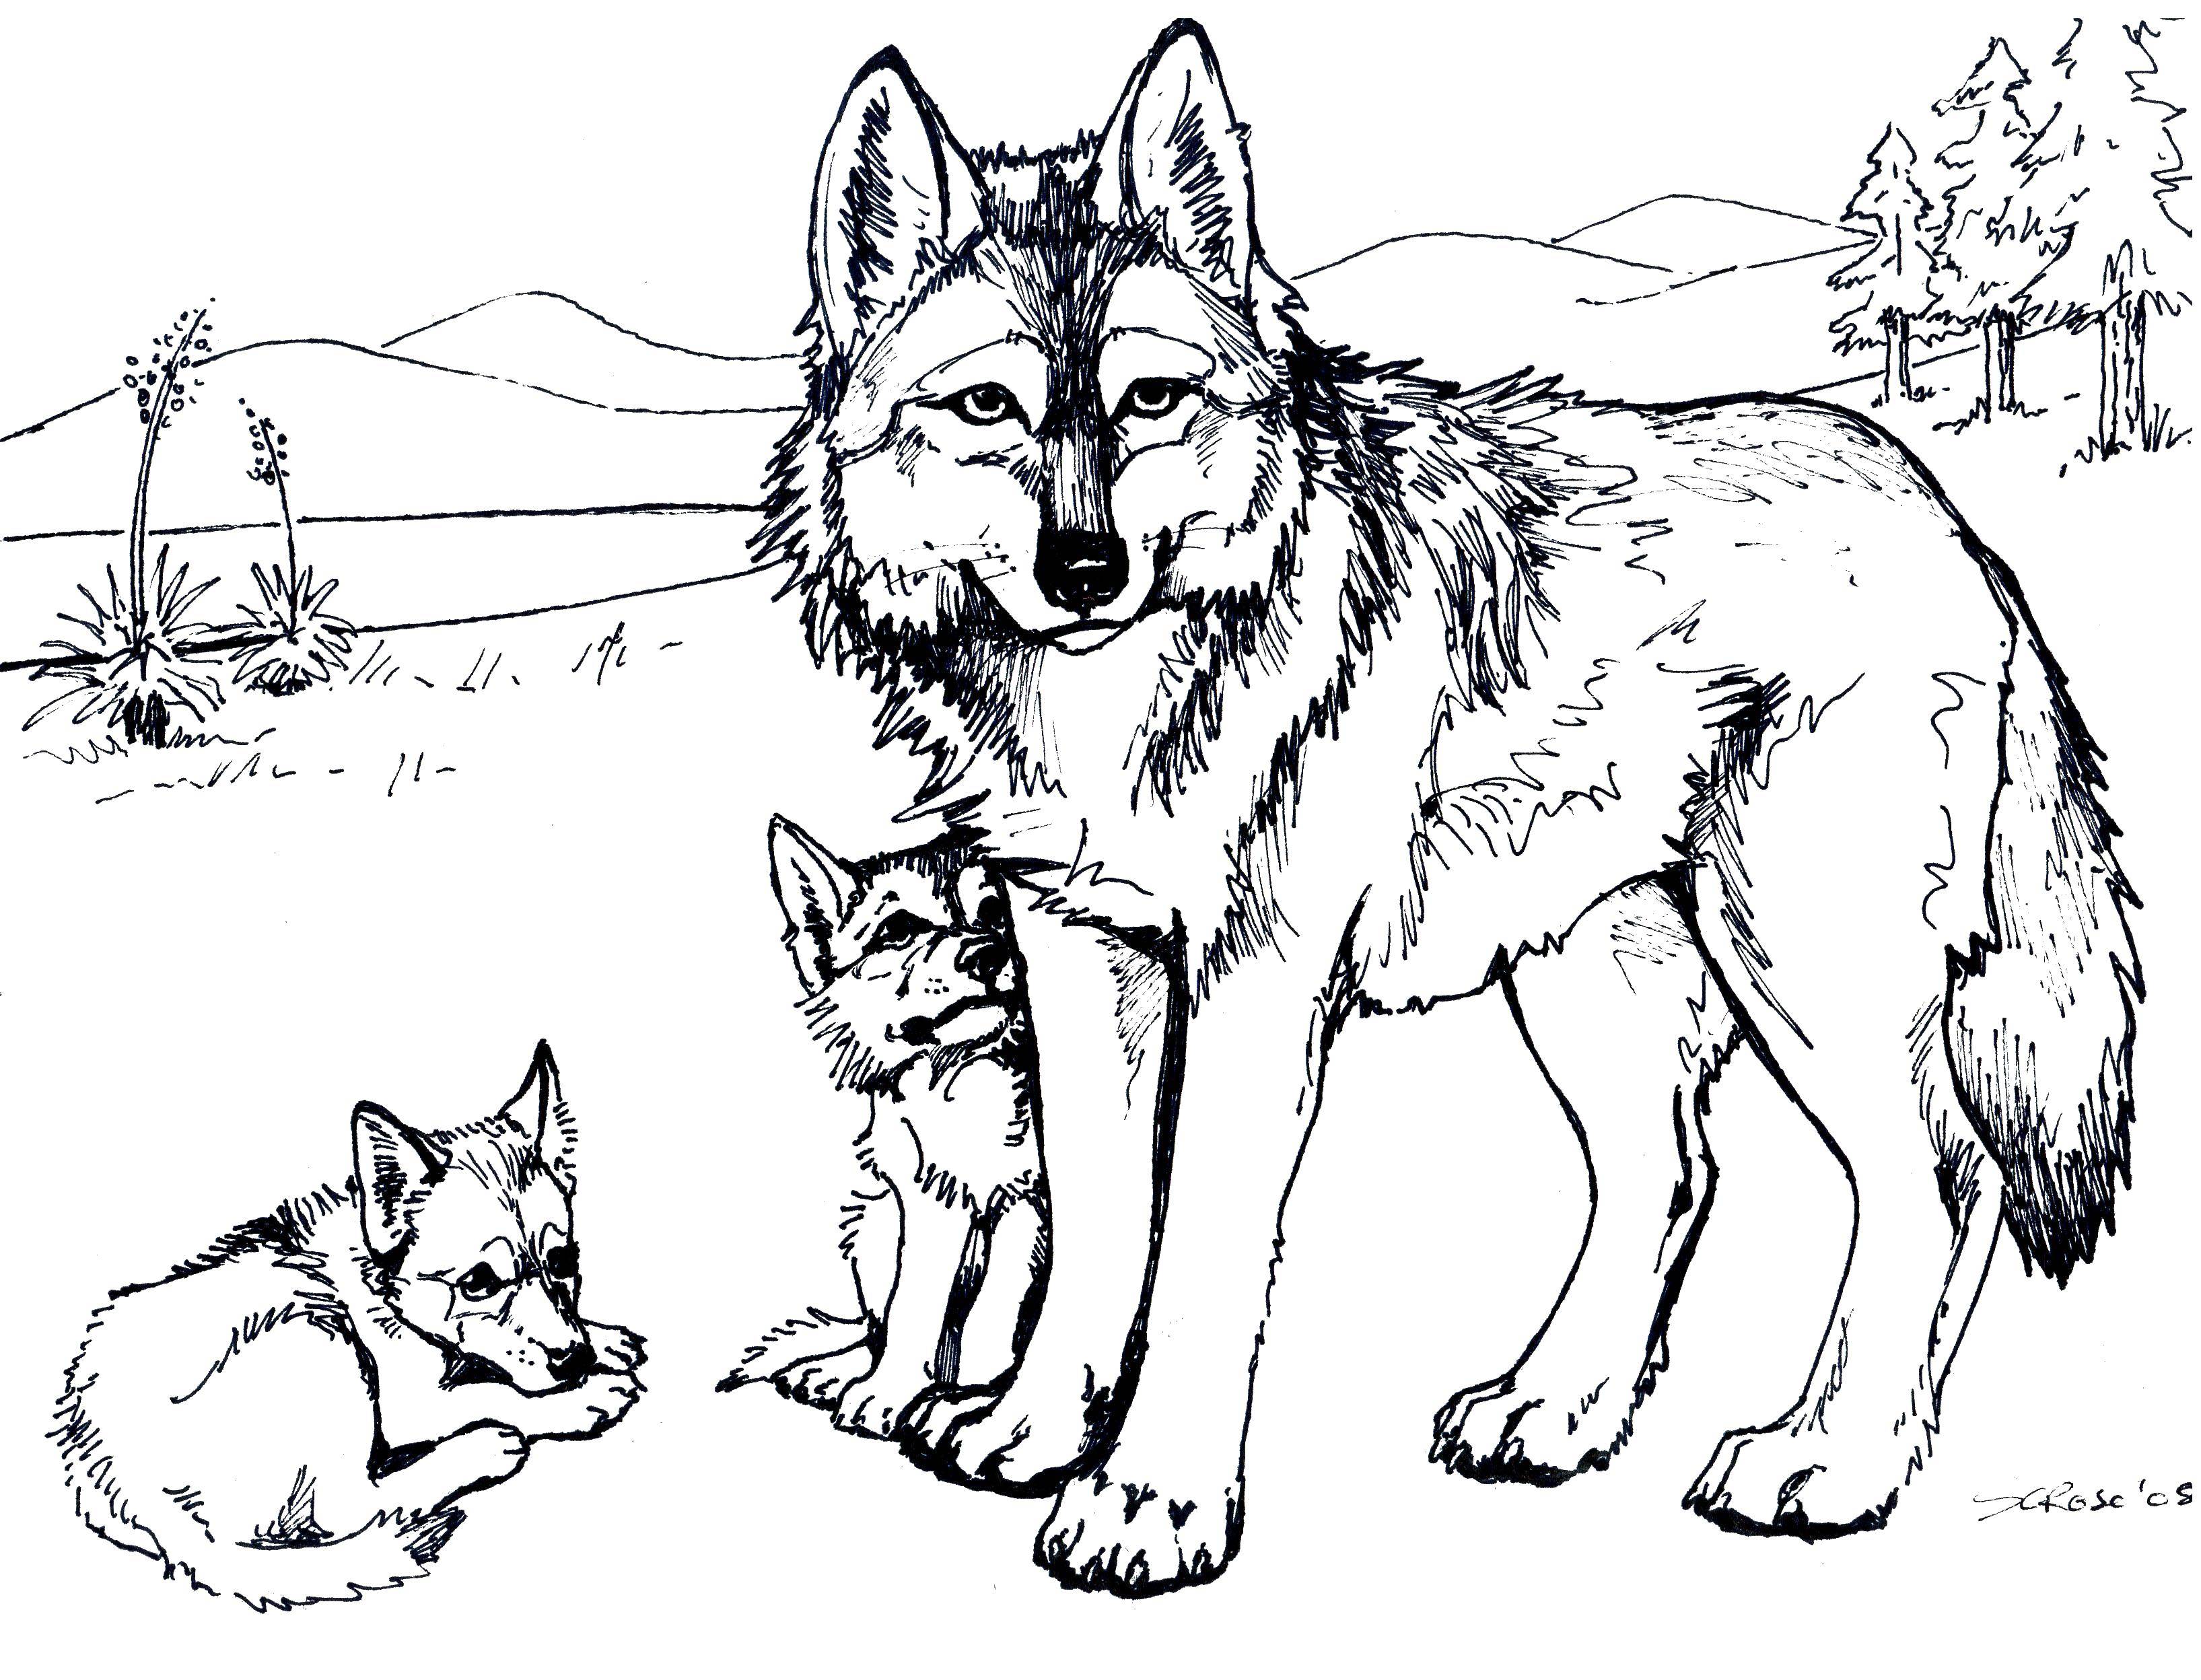 Coloring Wolves. Category nature. Tags:  nature, animals, wolves.